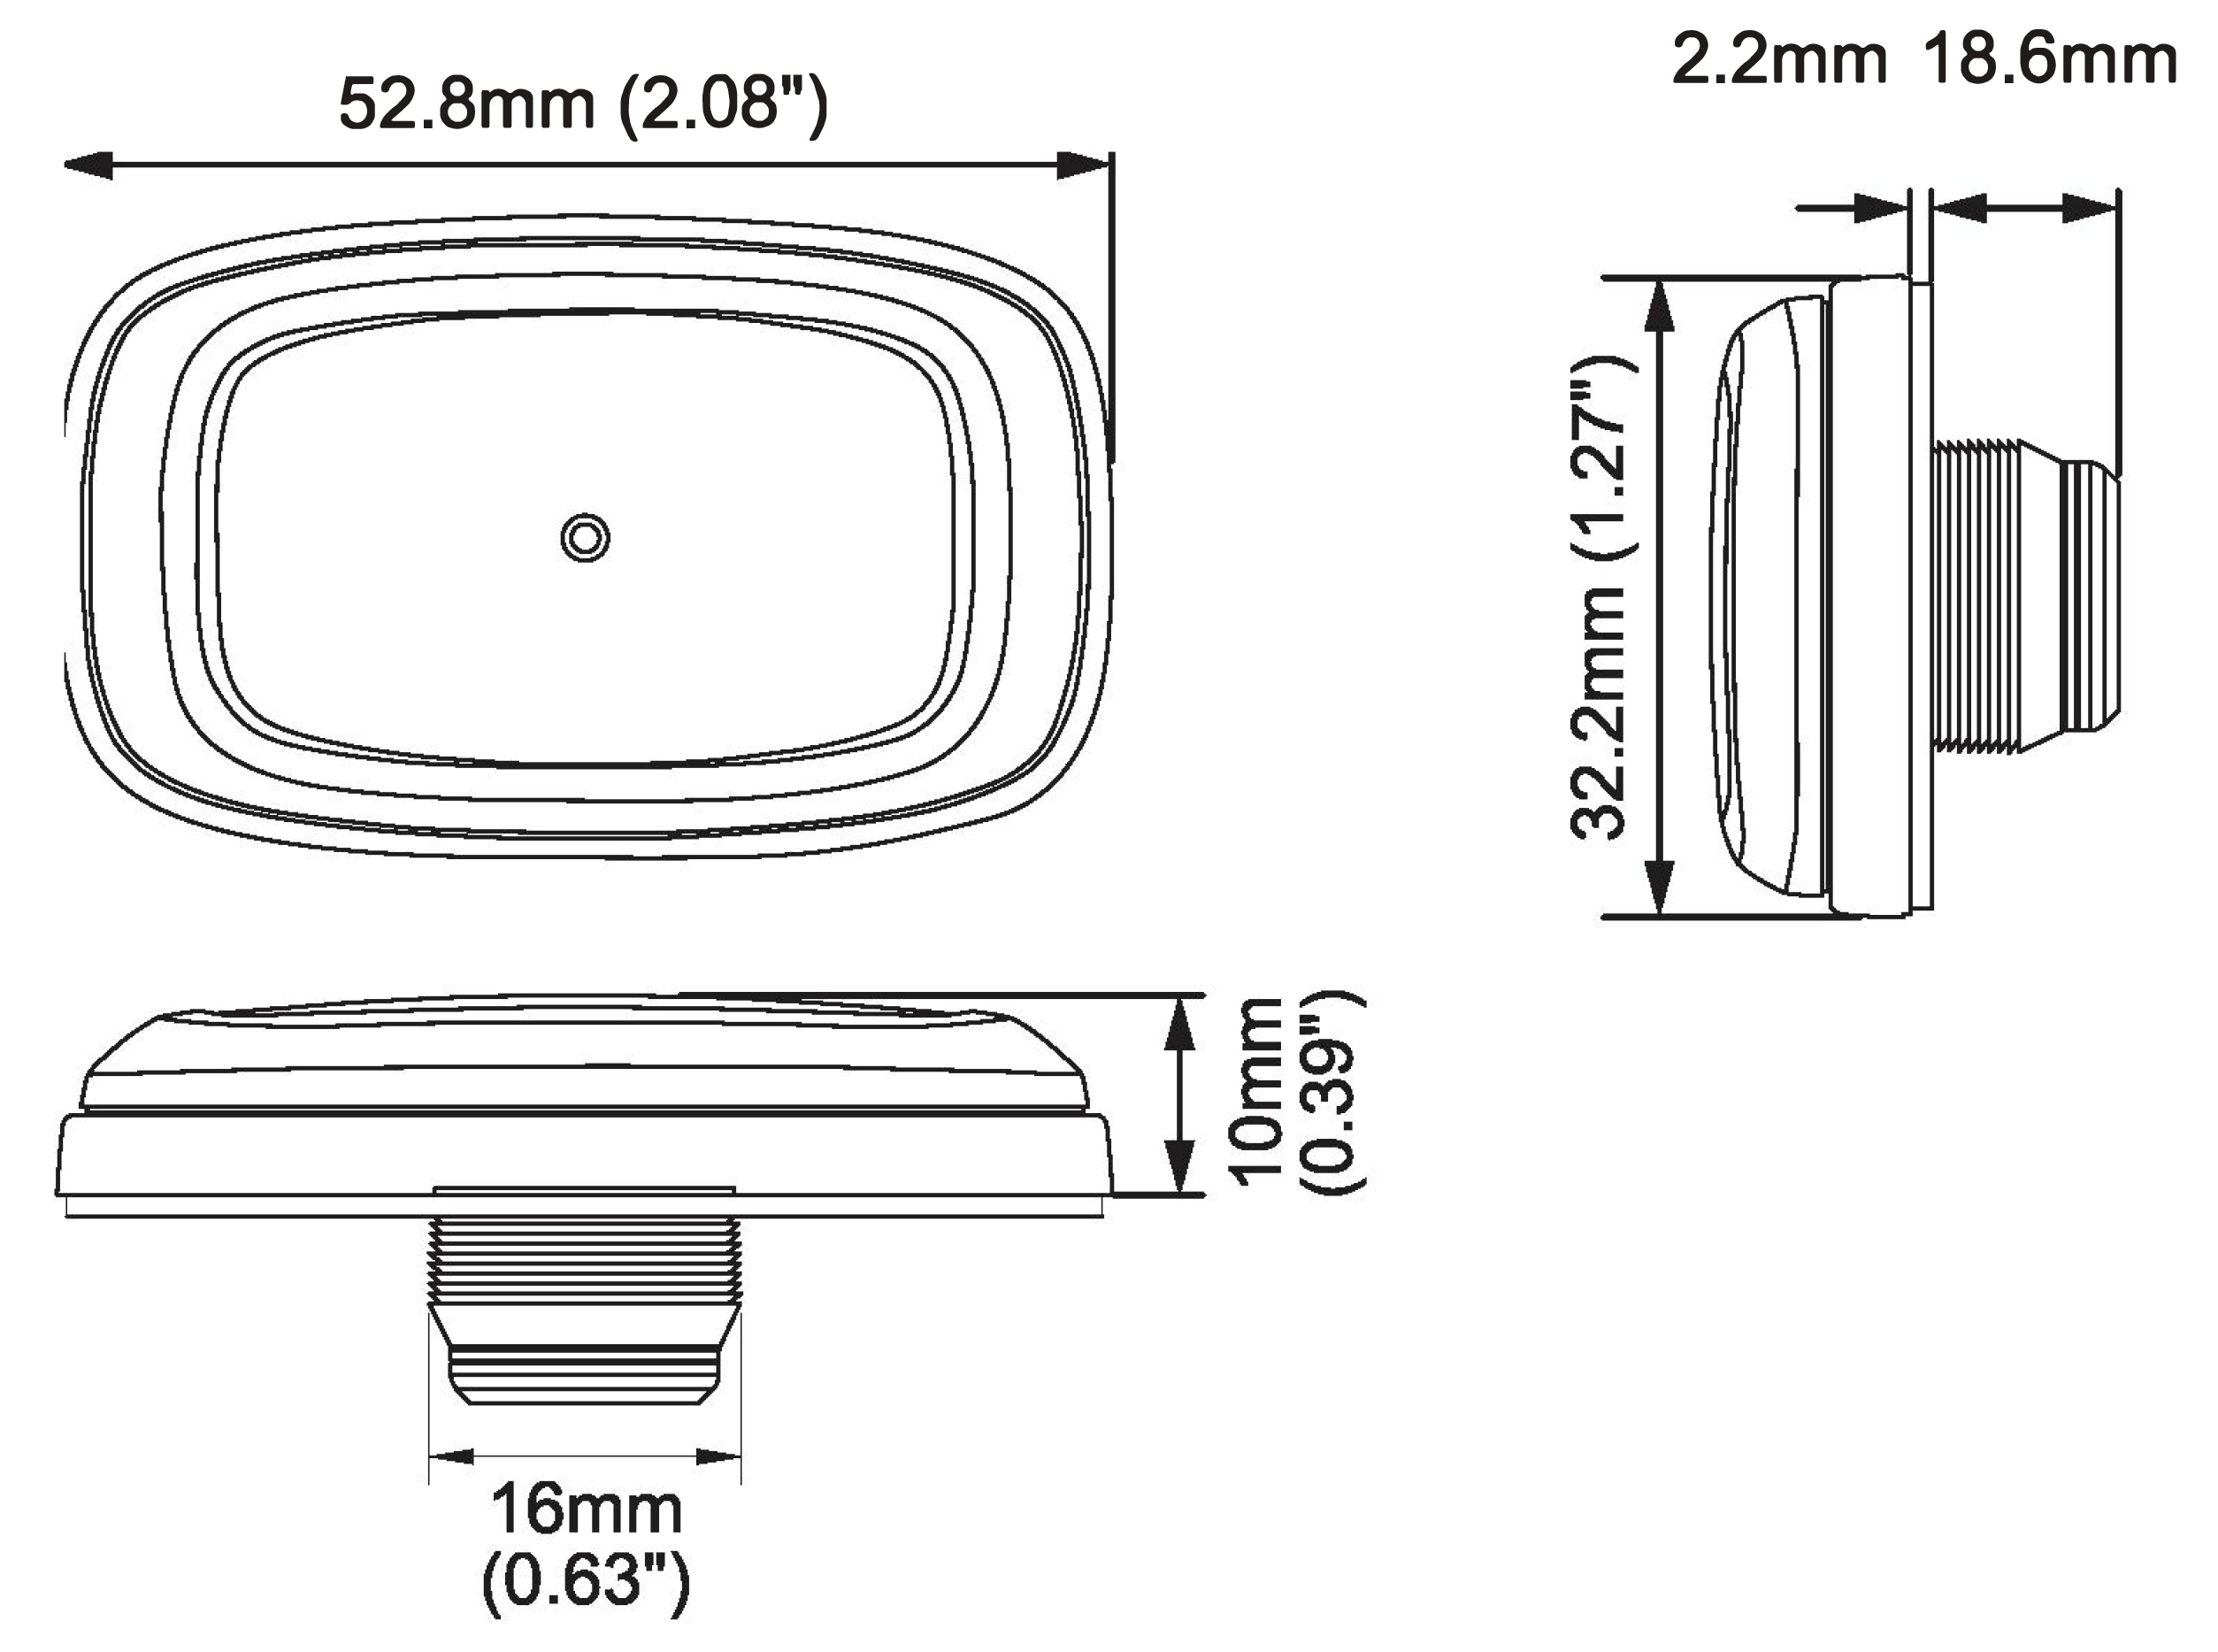 RX4 Reactor Warning Light Dimensions Drawing showing 52.8mm length, 32.2mm width and 10mm depth